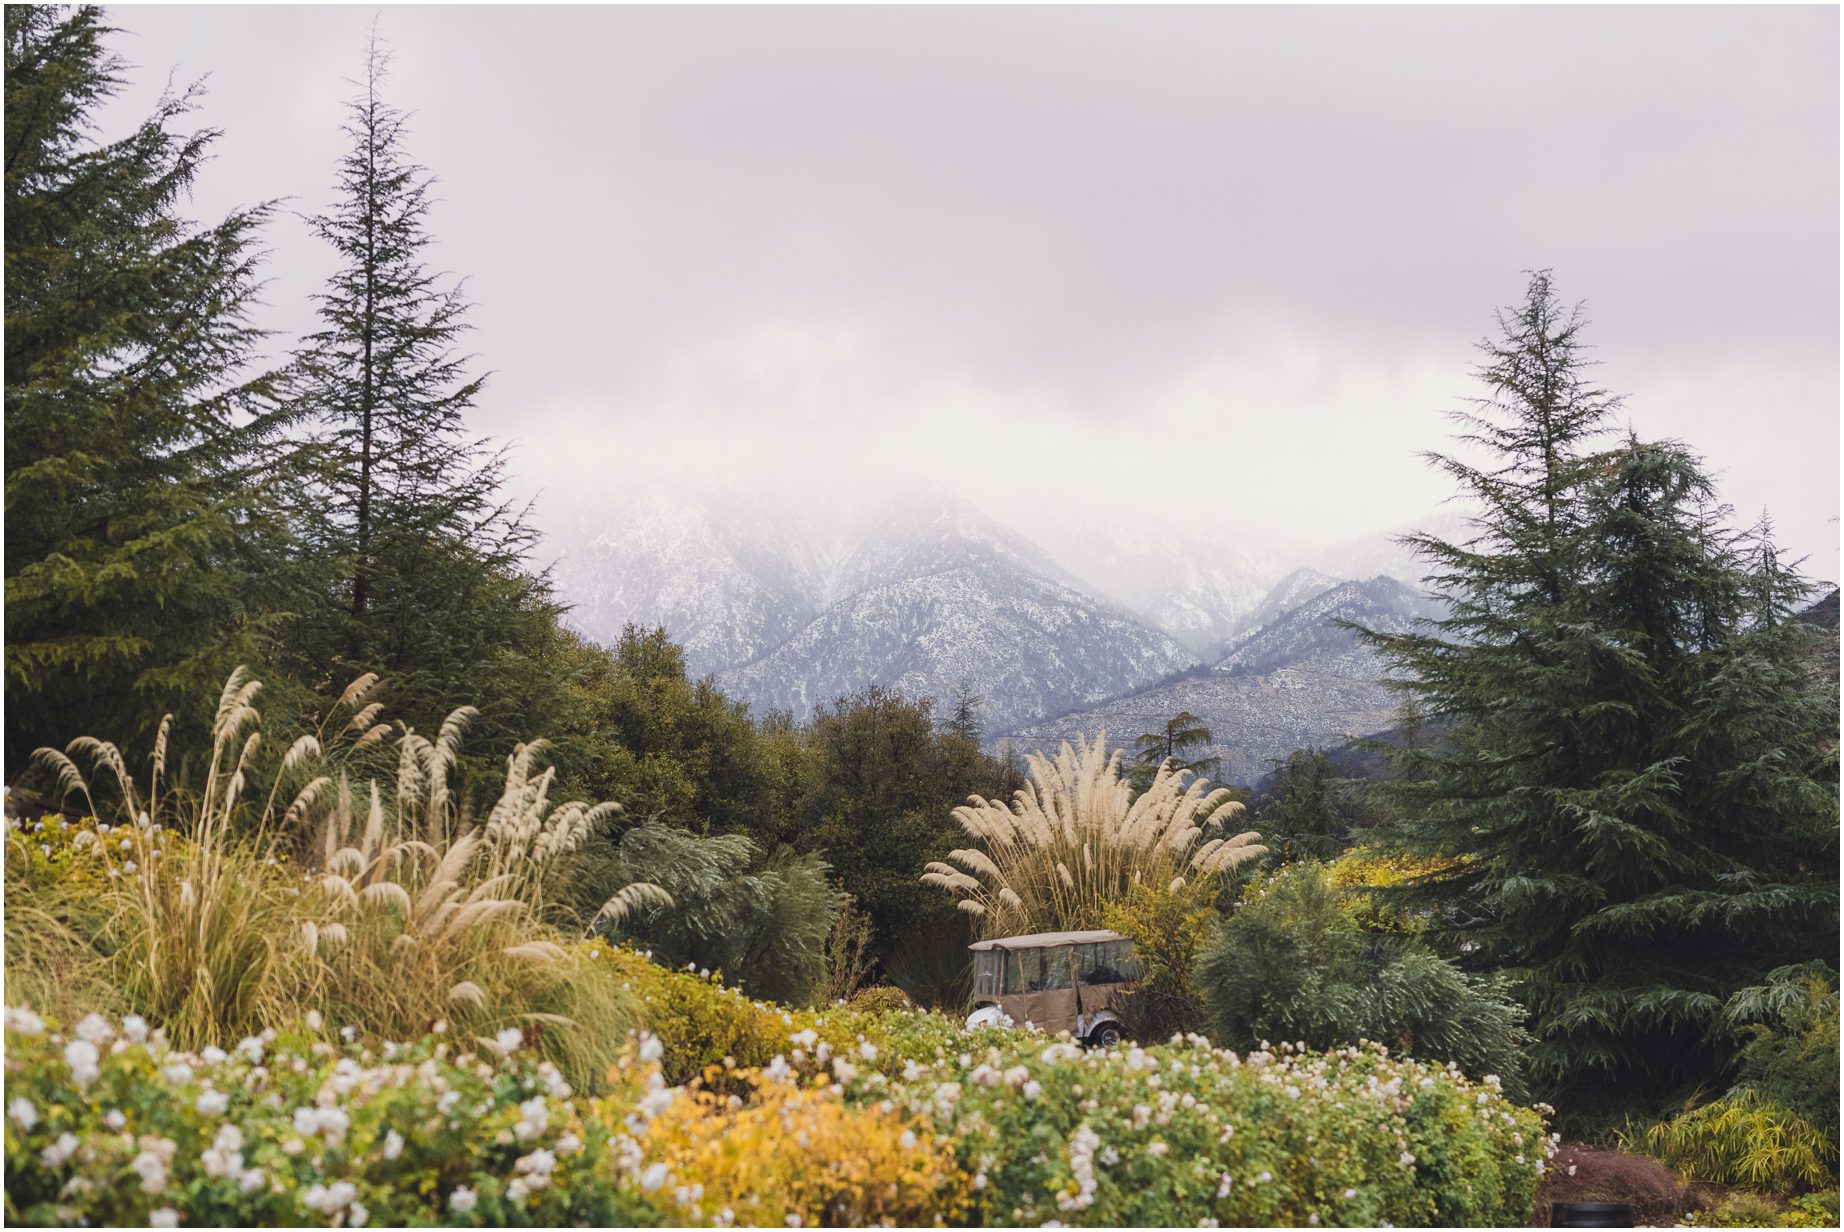 Dreamy mountainscape featuring evergreens and low lying clouds in Oak Glen California